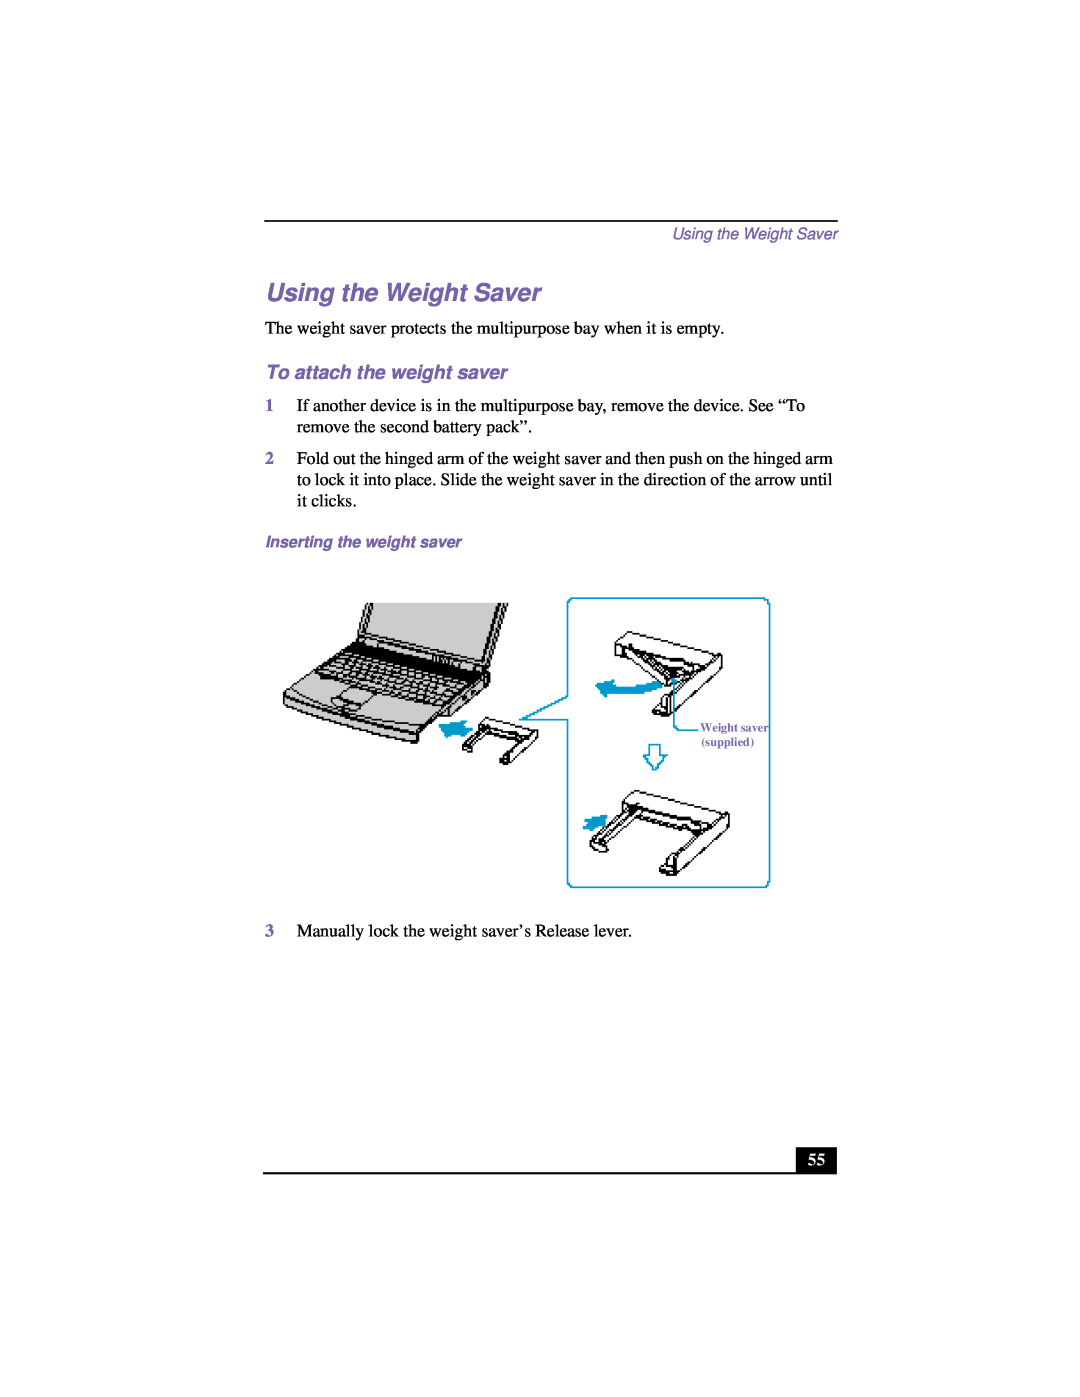 Sony PCG-FX150K, PCG-FX140K, PCG-FX190, PCG-FX170, PCG-FX120K manual Using the Weight Saver, To attach the weight saver 